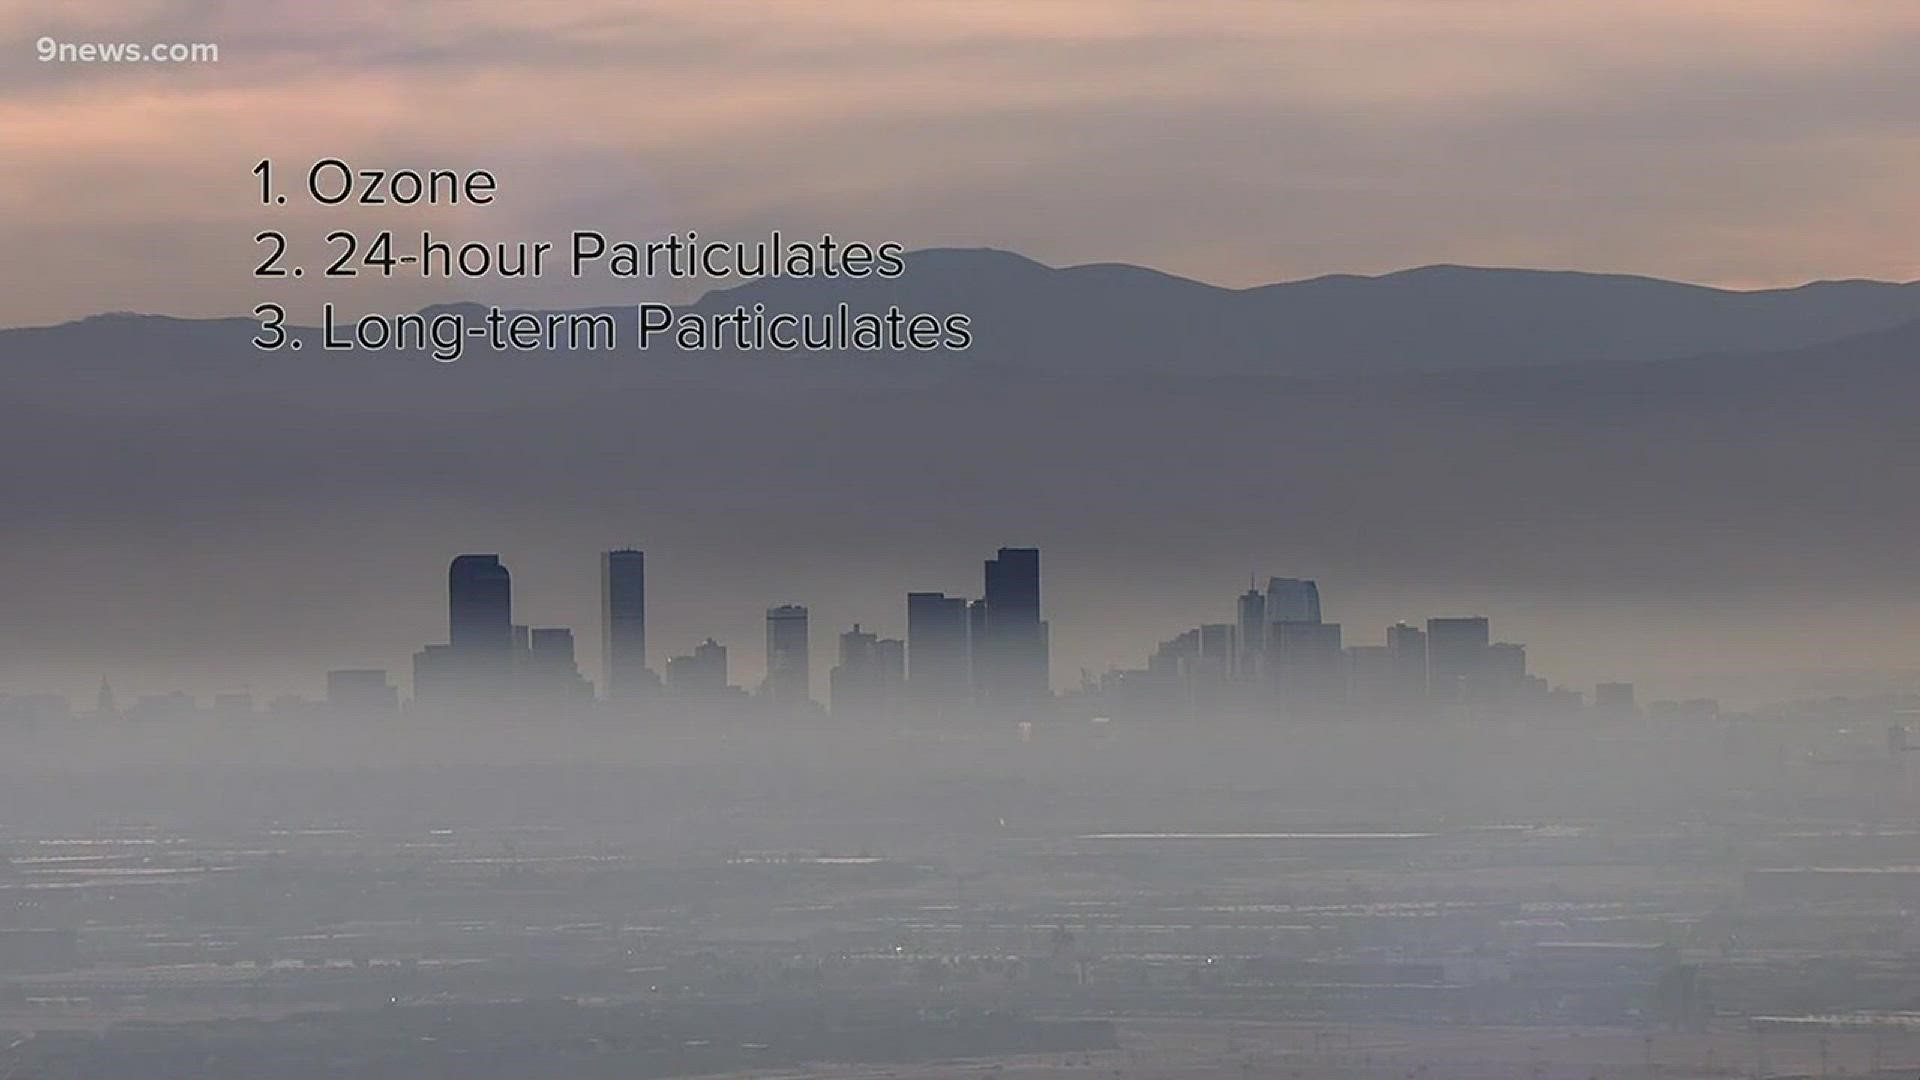 A new report from the American Lung Association shows some concerning air quality in the the Denver area.	Ozone pollution is the primary concern.